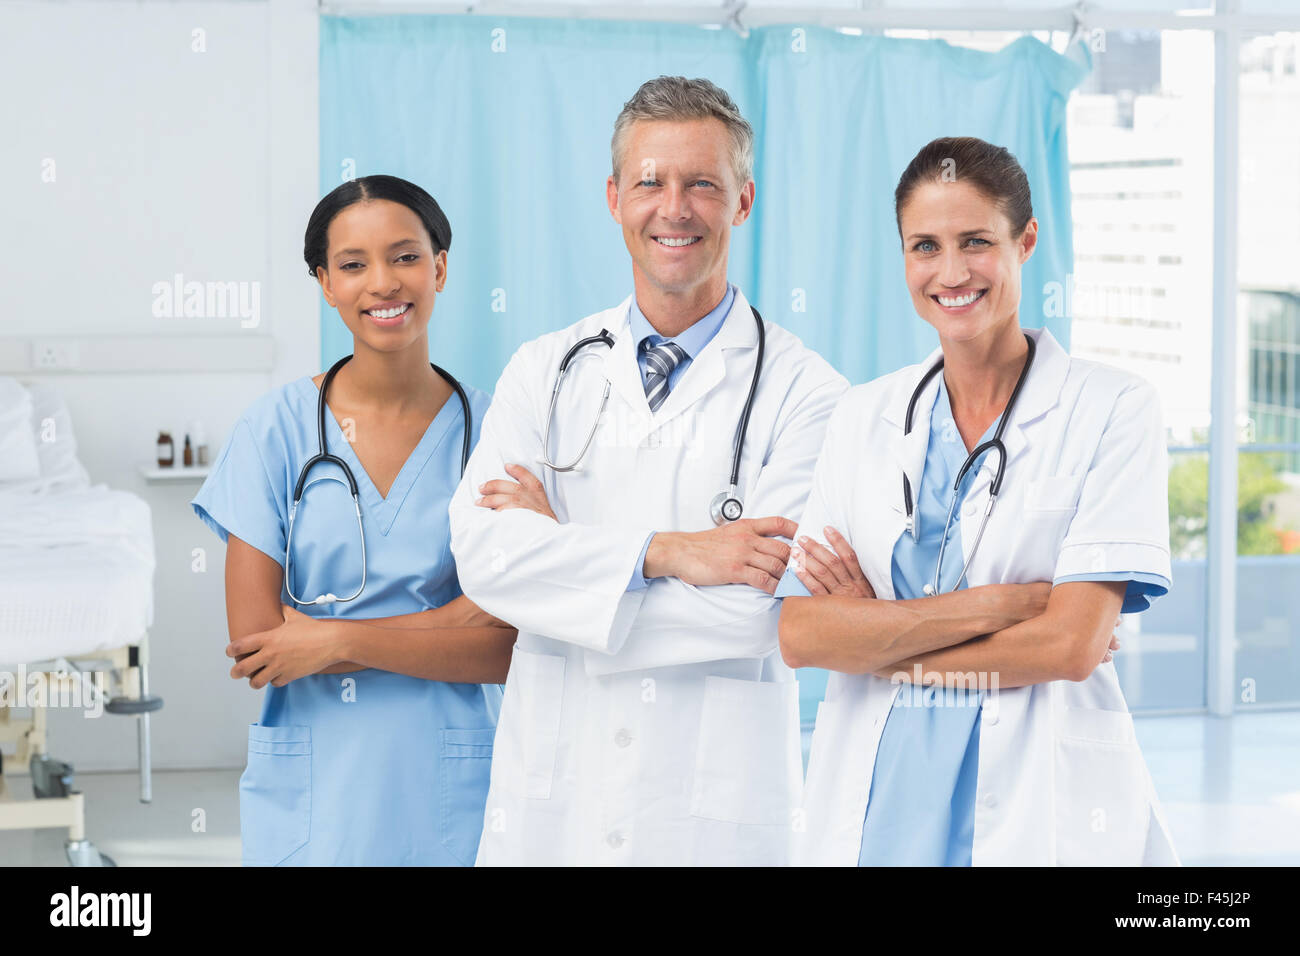 Confident male and female doctors Stock Photo